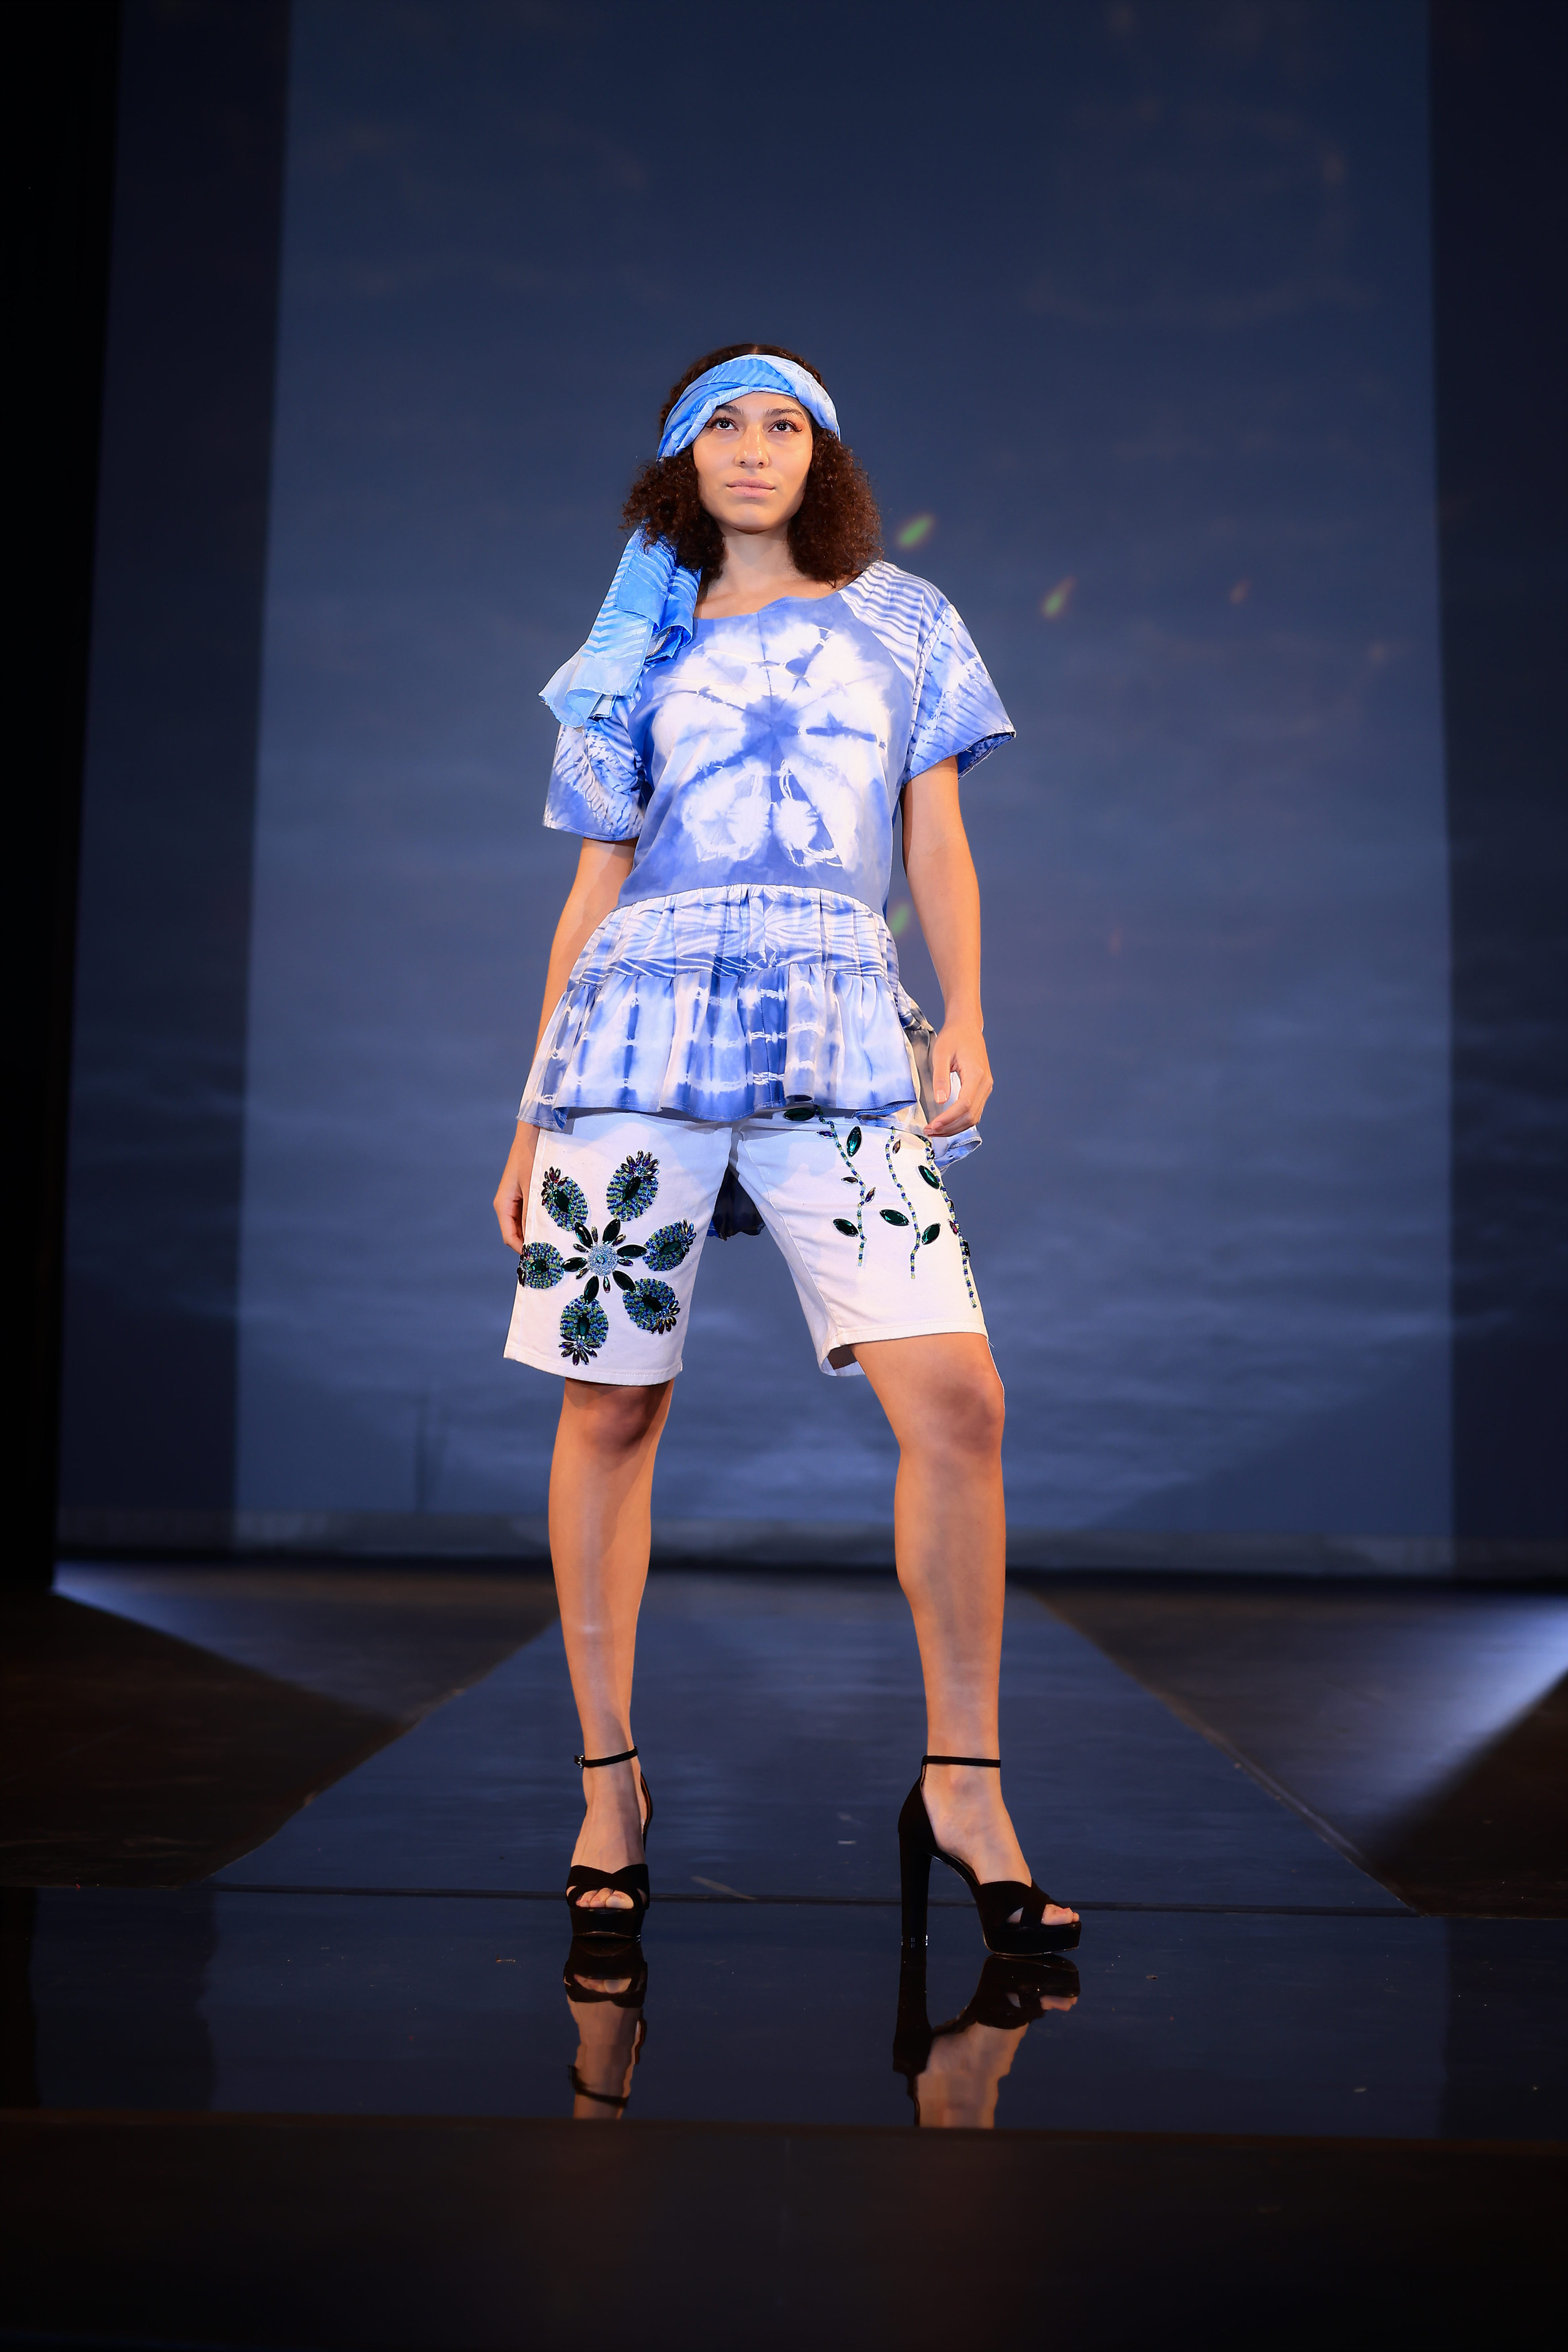 Model is wearing a blue tie-dyed top, white Bermuda shorts with a black floral pattern, black heels, and a blue tie-dyed scarf on her head.